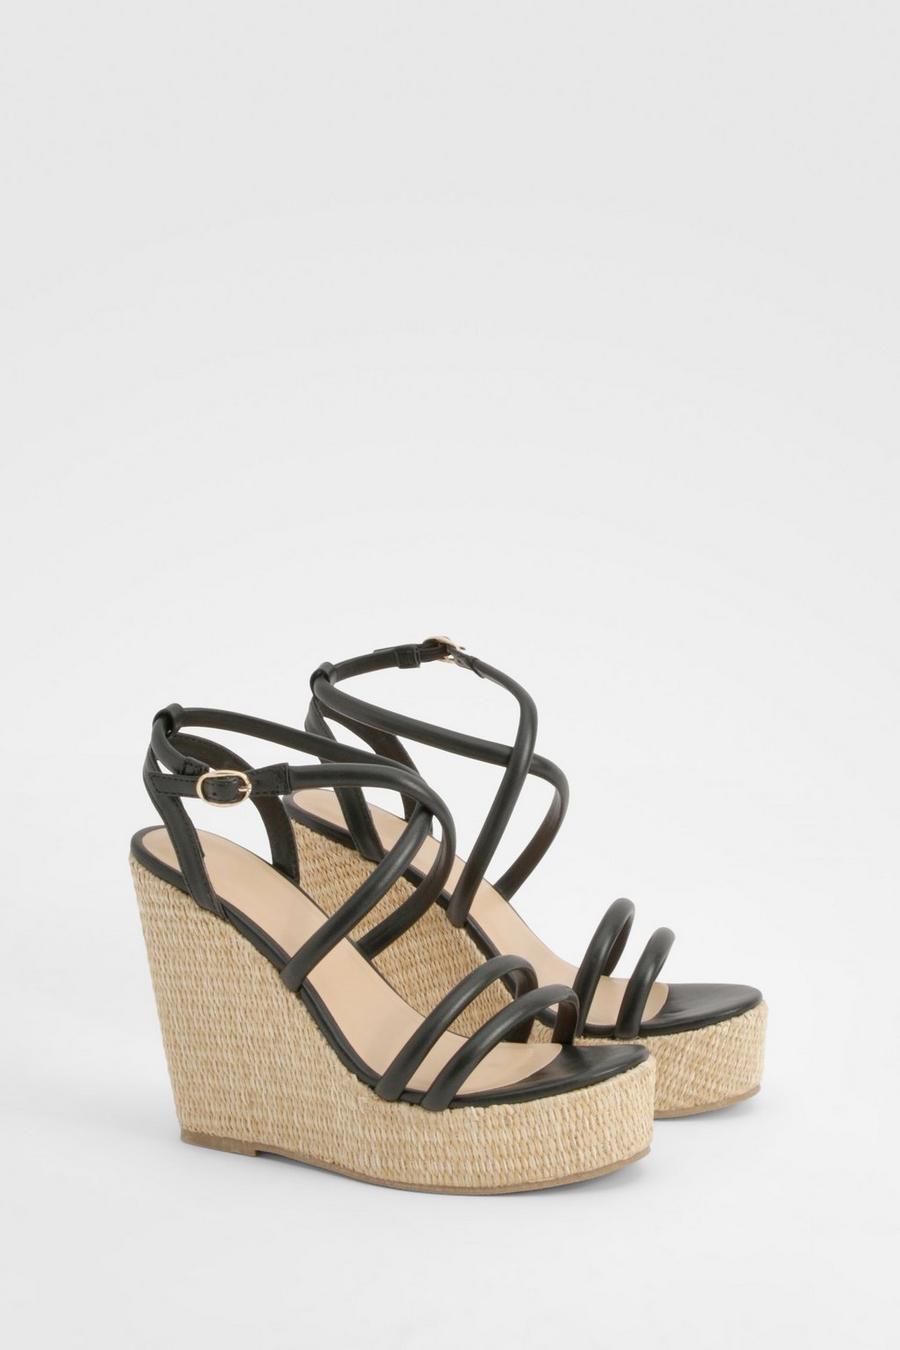 Black Strappy Cross Front Wedges